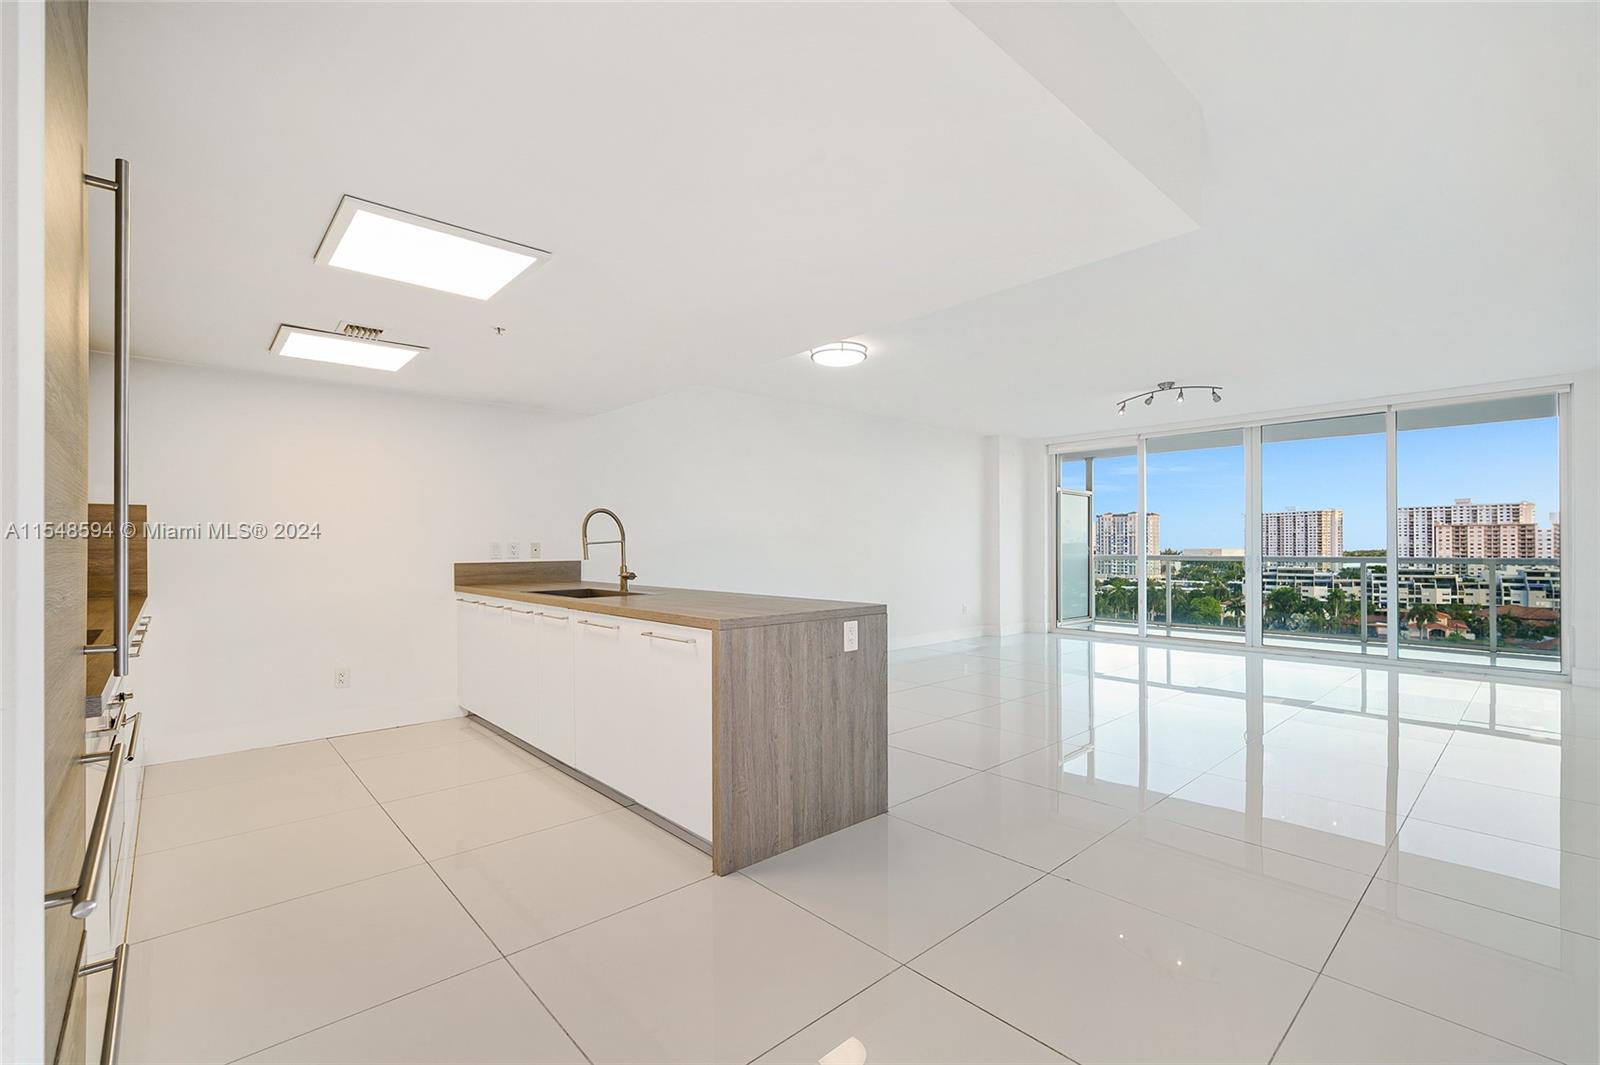 Property for Sale at 400 Sunny Isles Blvd 1018, Sunny Isles Beach, Miami-Dade County, Florida - Bedrooms: 3 
Bathrooms: 3  - $1,135,000